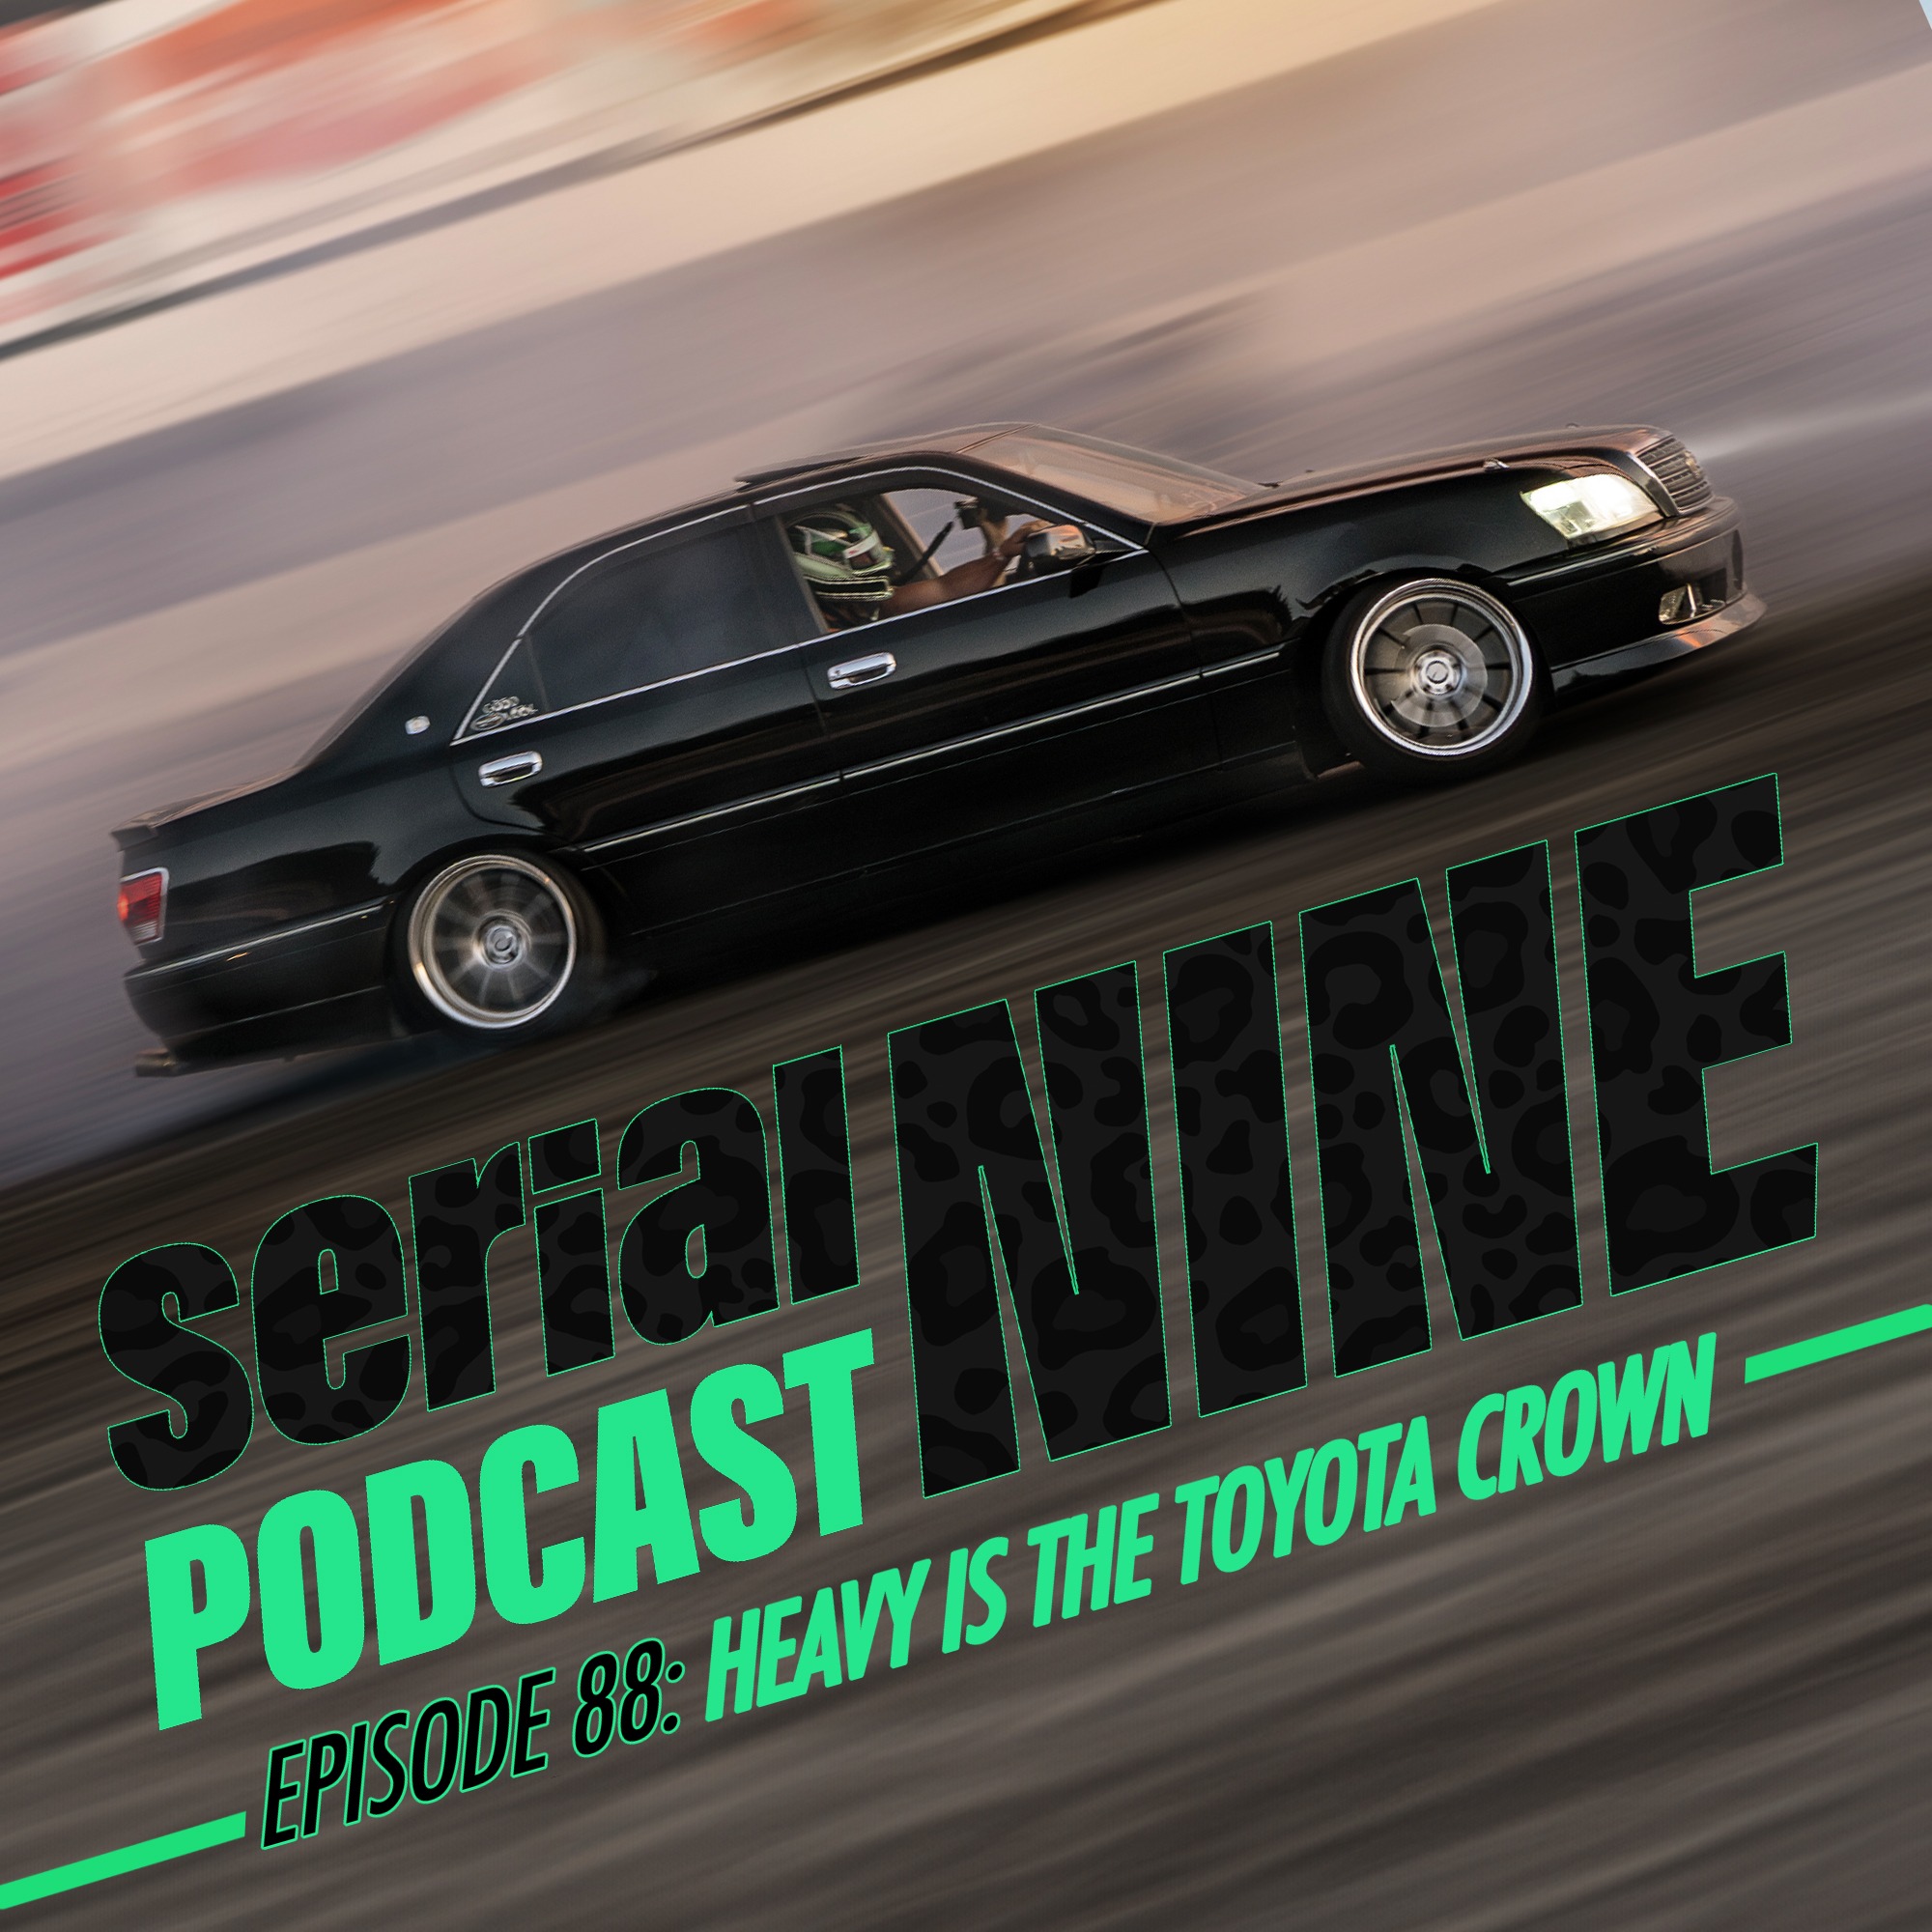 SerialPodcastNine Episode 88: HEAVY IS THE TOYOTA CROWN